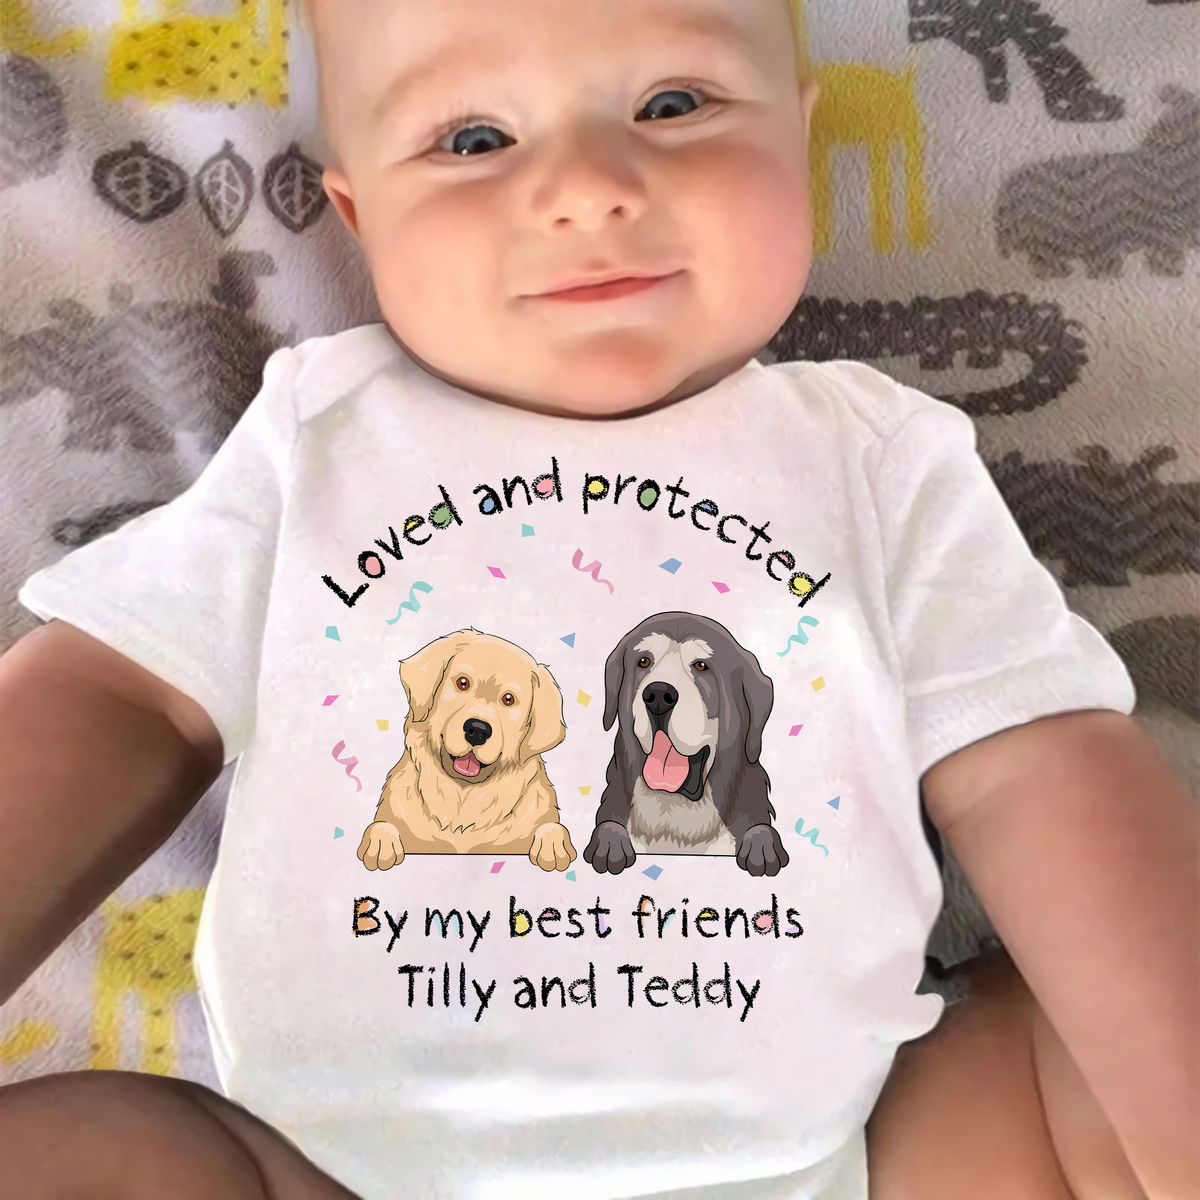 Personalized Shirt - Custom Baby Onesies - Loved and Protected By my best friends_1